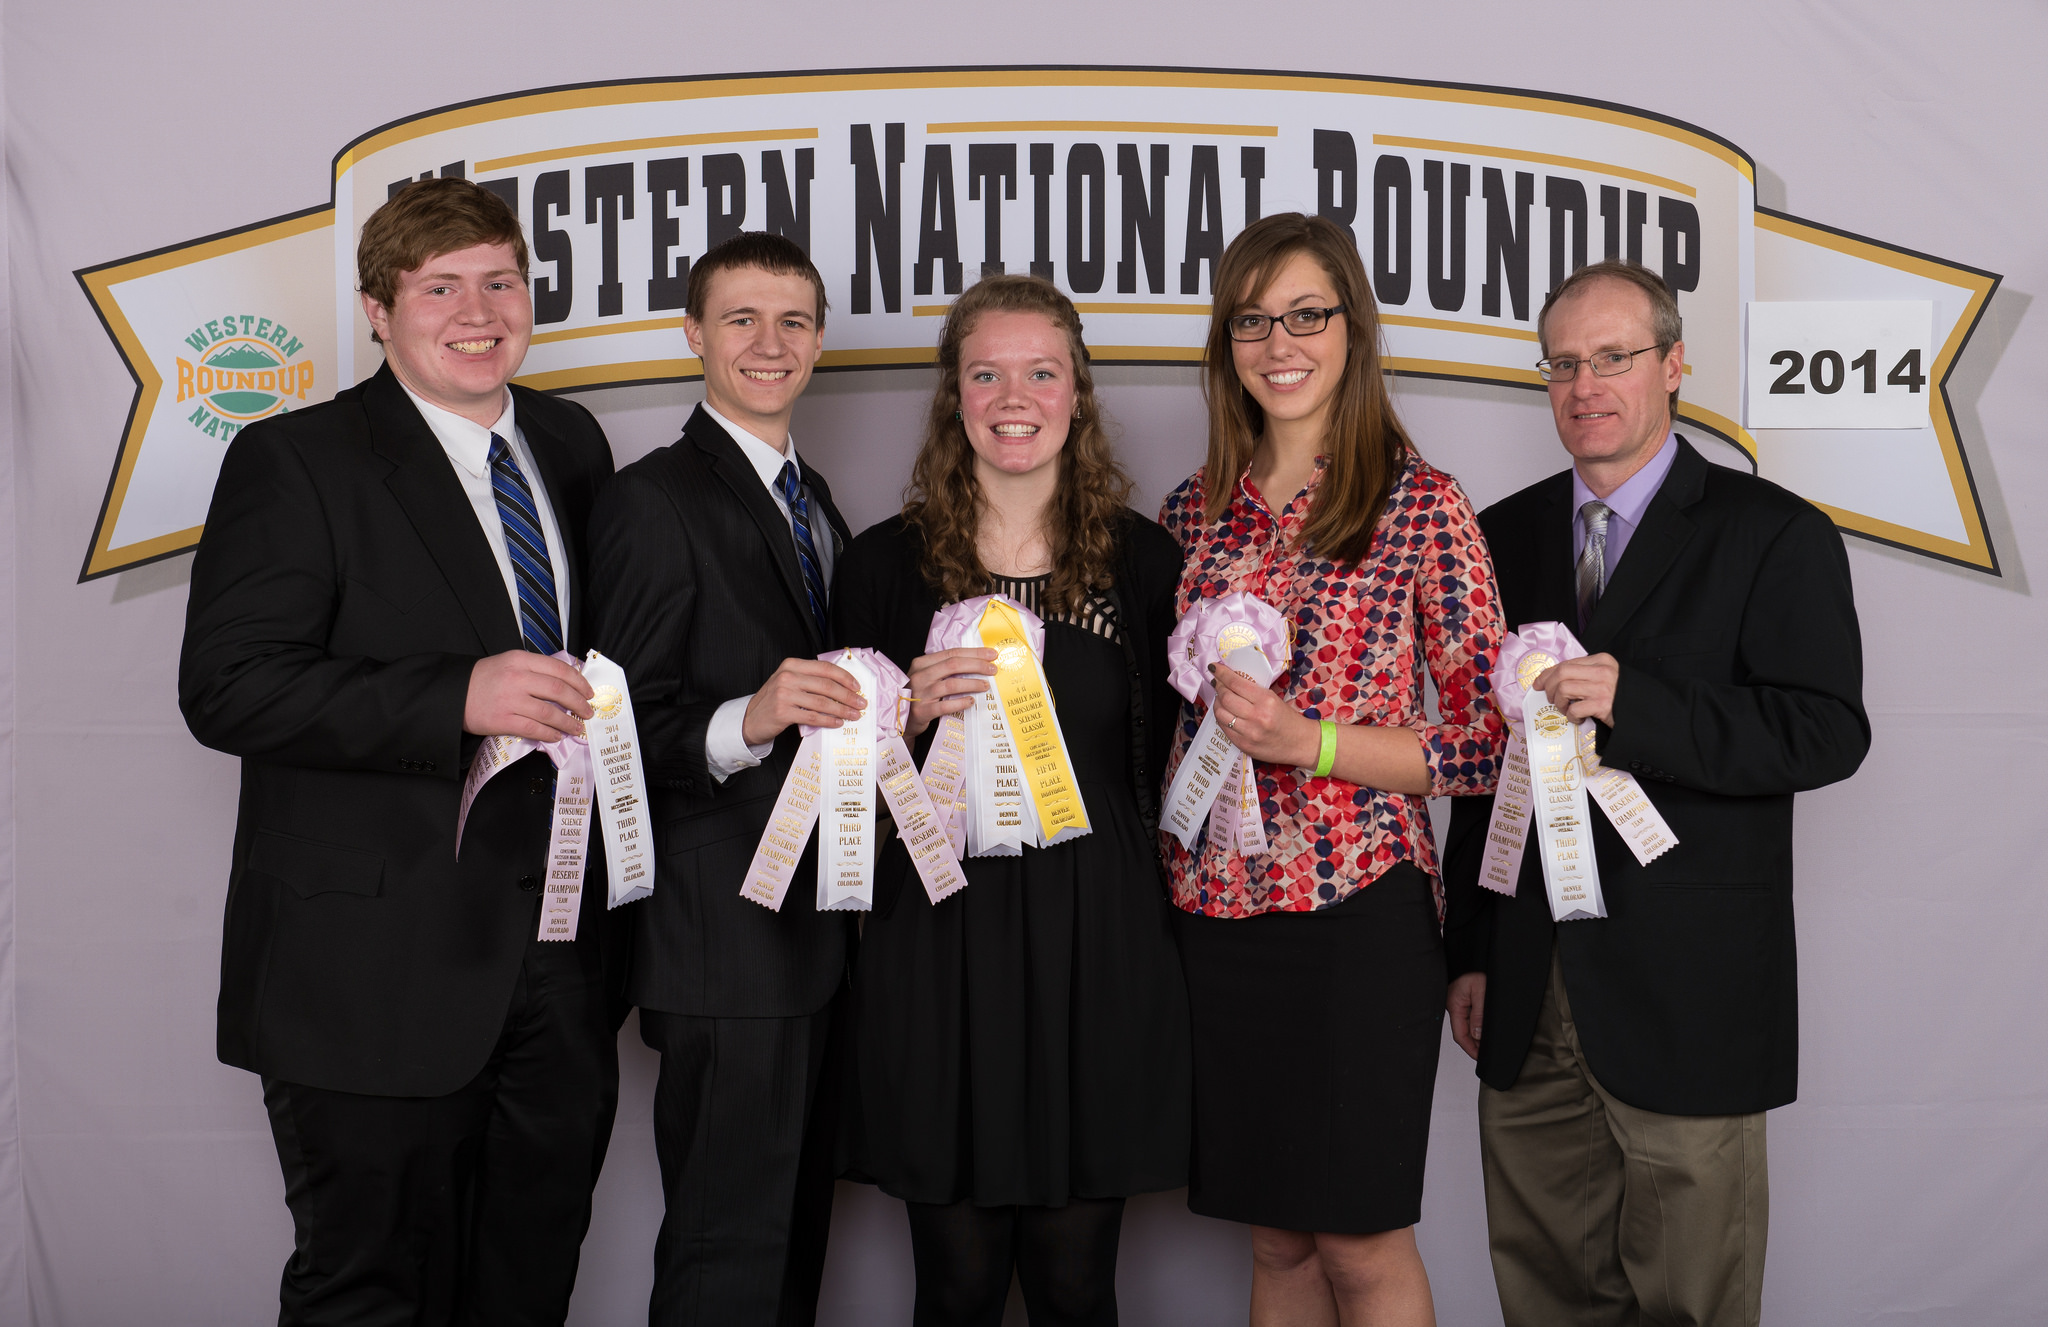 The Oliver County consumer choices team places third overall at the Western National Roundup in Denver, Colo. Pictured (from left) are team members Shane Giedd, Tanner Berger, Emily Klein and Rebecca Liffrig, and coach Rick Schmidt.